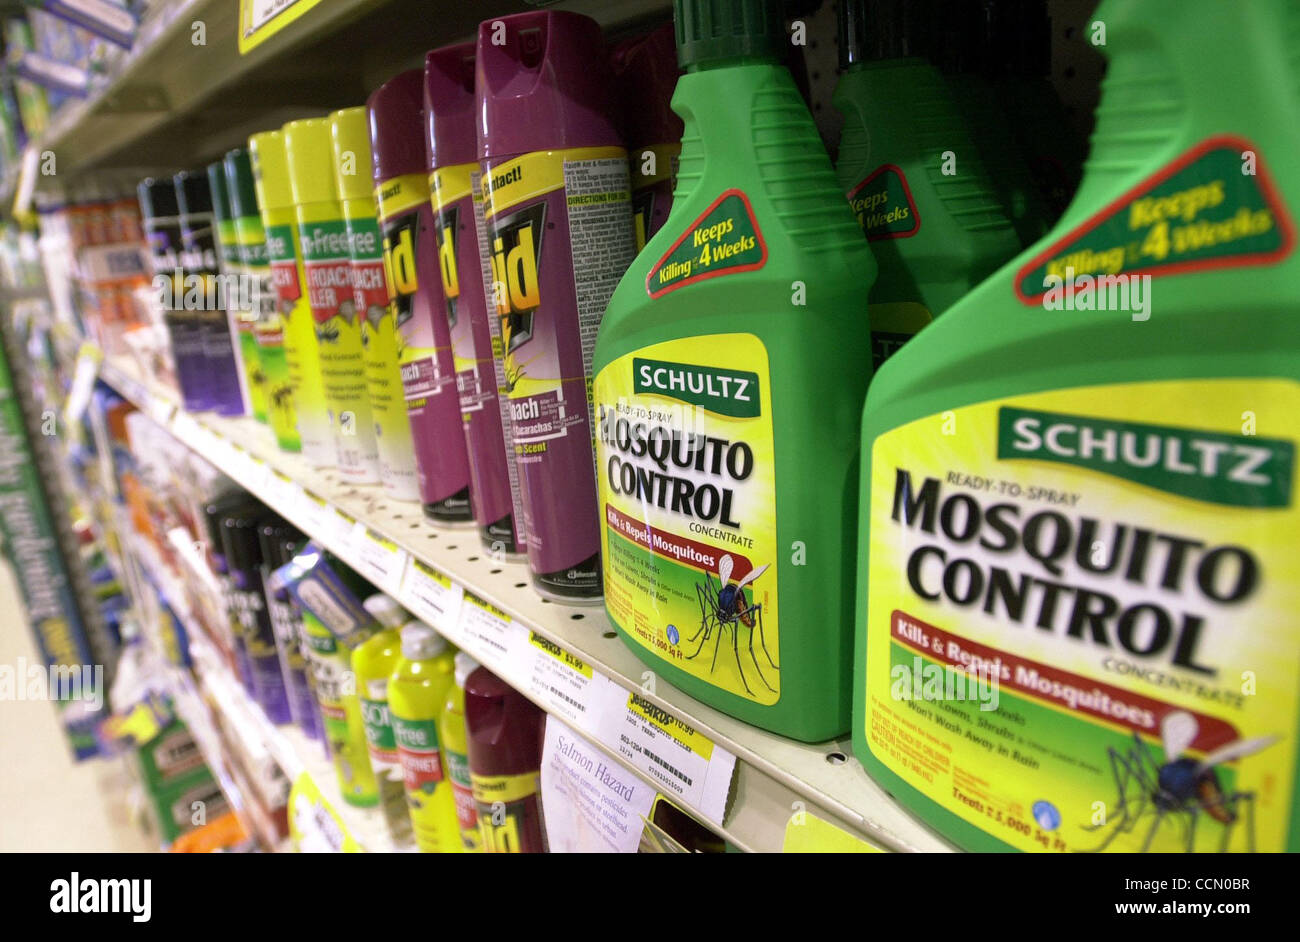 Mosquito-control related products are on display for sale at Yardbirds in Martinez, Calif. on Friday, July 16, 2004.  The West Nile virus scare has caused an increase in sales for mosquito-control devices.  (Contra Costa Newspapers/Tue Nam Ton) Stock Photo